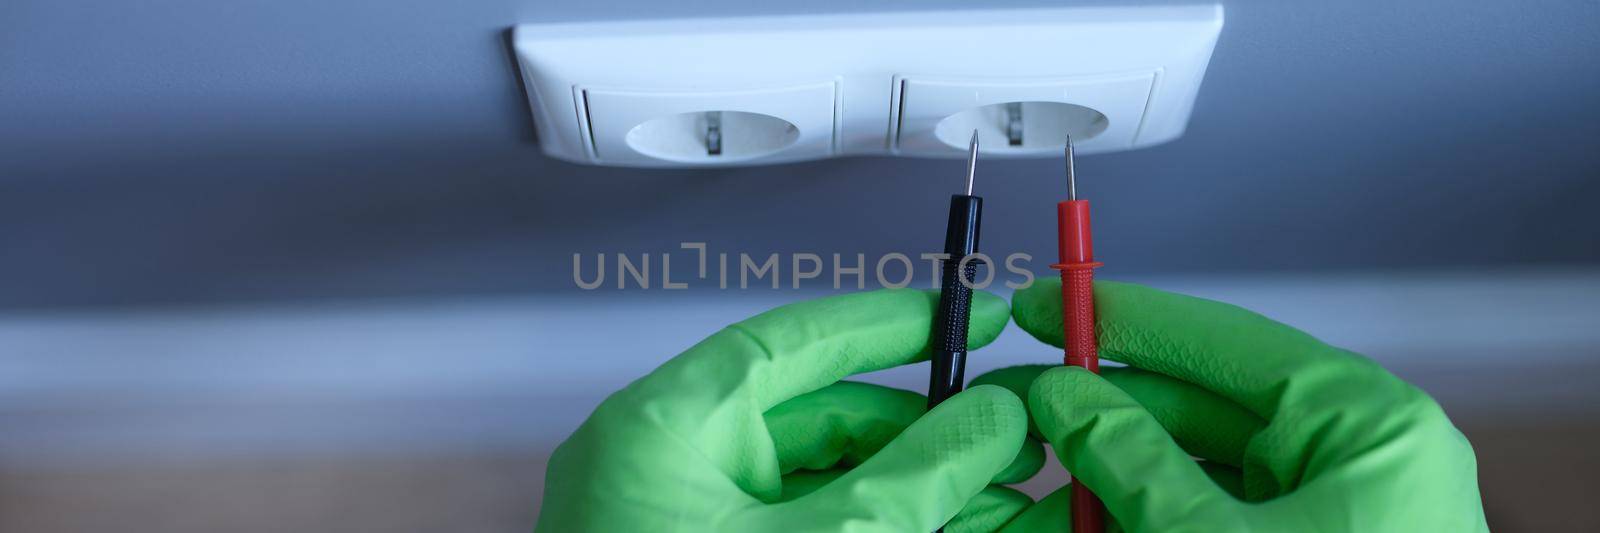 Craftsman in rubber gloves holding tester near electrical outlet at home closeup. Safety when working with electricity concept